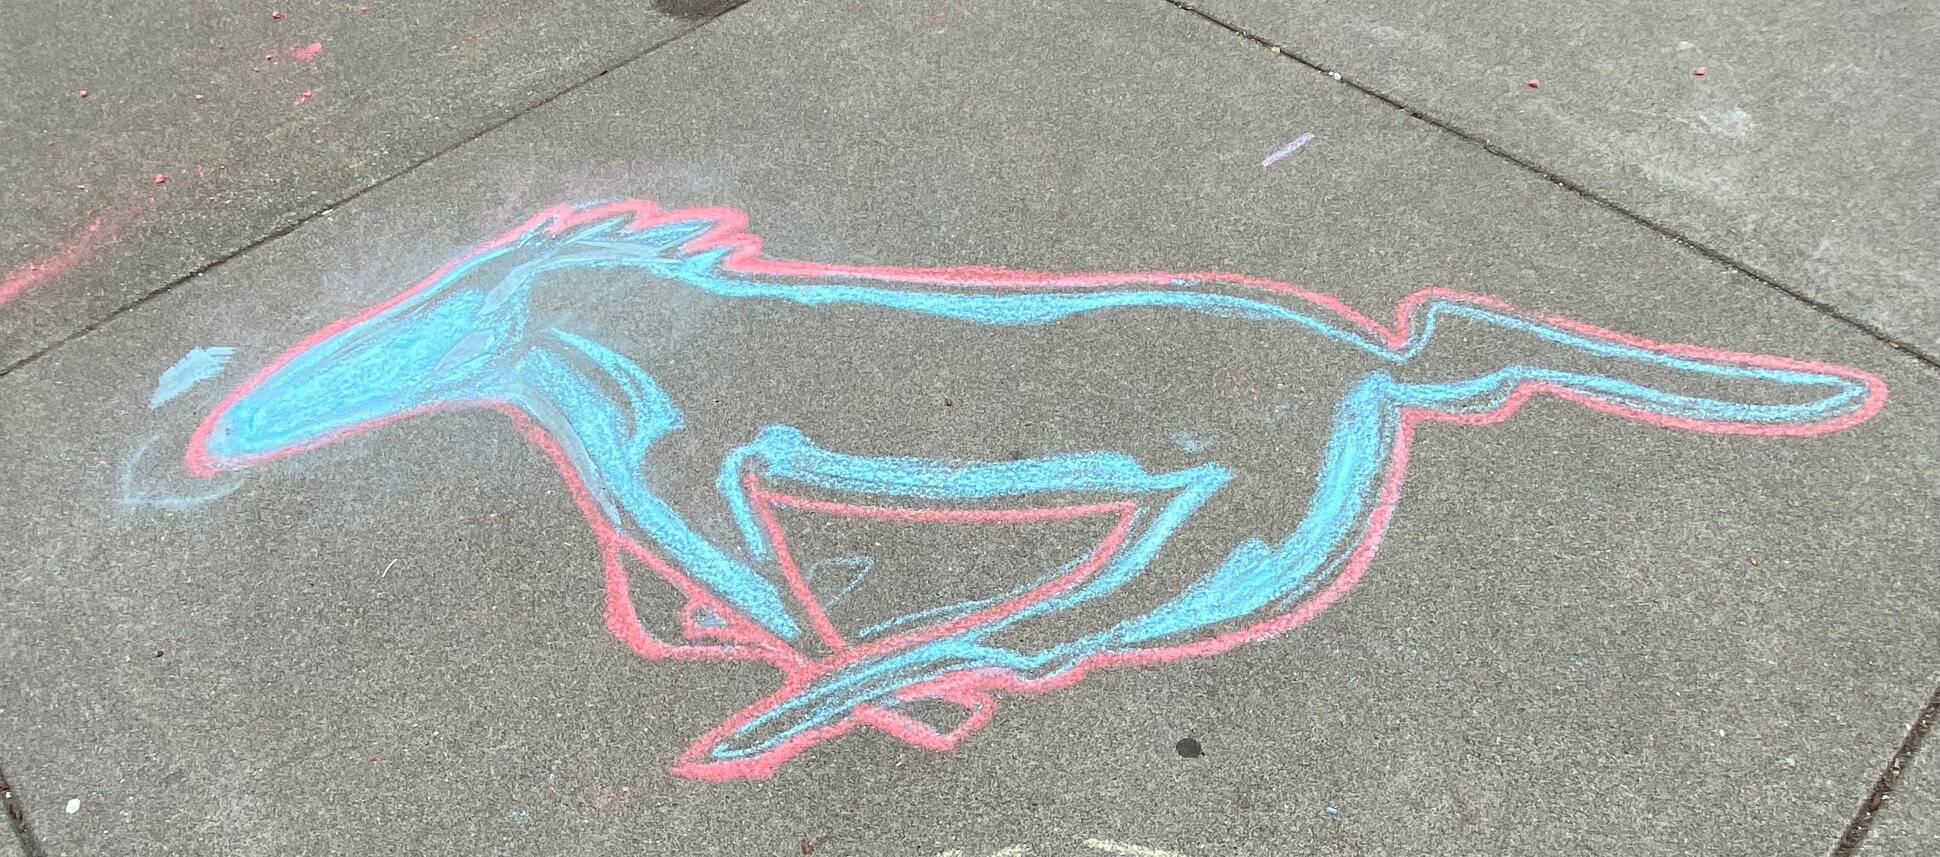 Racing along the waterfront… chalk drawing at the Goldbelt Tram on Aug. 3. (Photo by Denise Carroll)